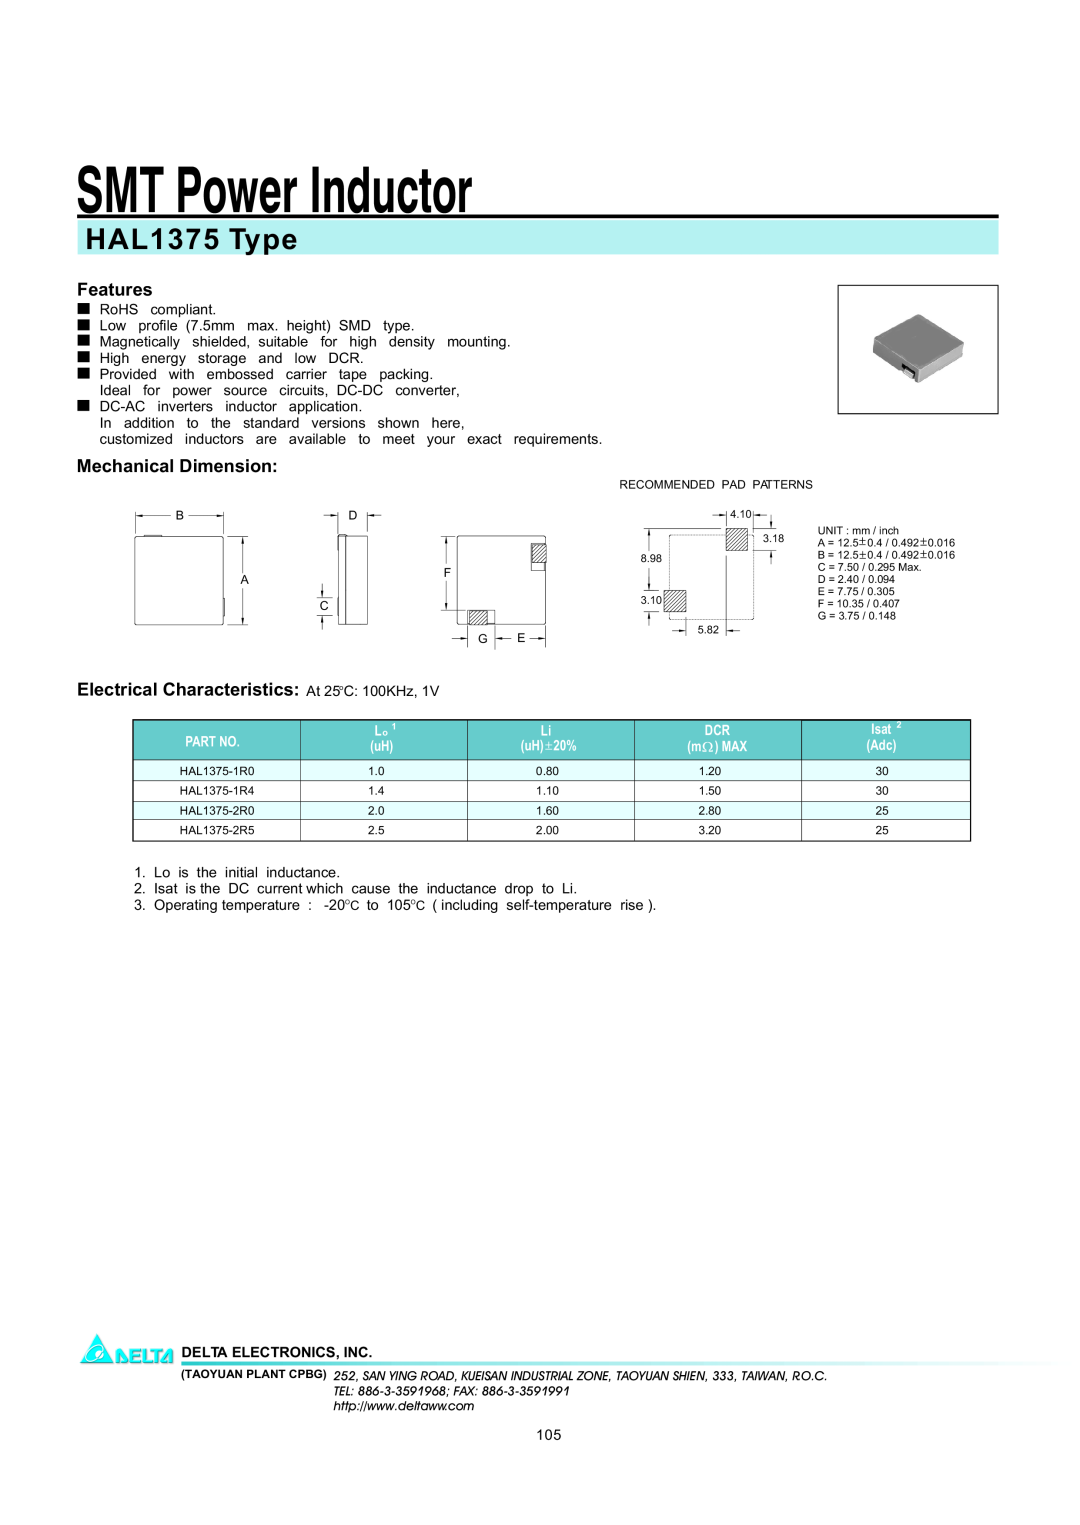 Delta Electronics manual SMT Power Inductor, HAL1375 Type, Features, Mechanical Dimension, Isat, uH 20%, m MAX 